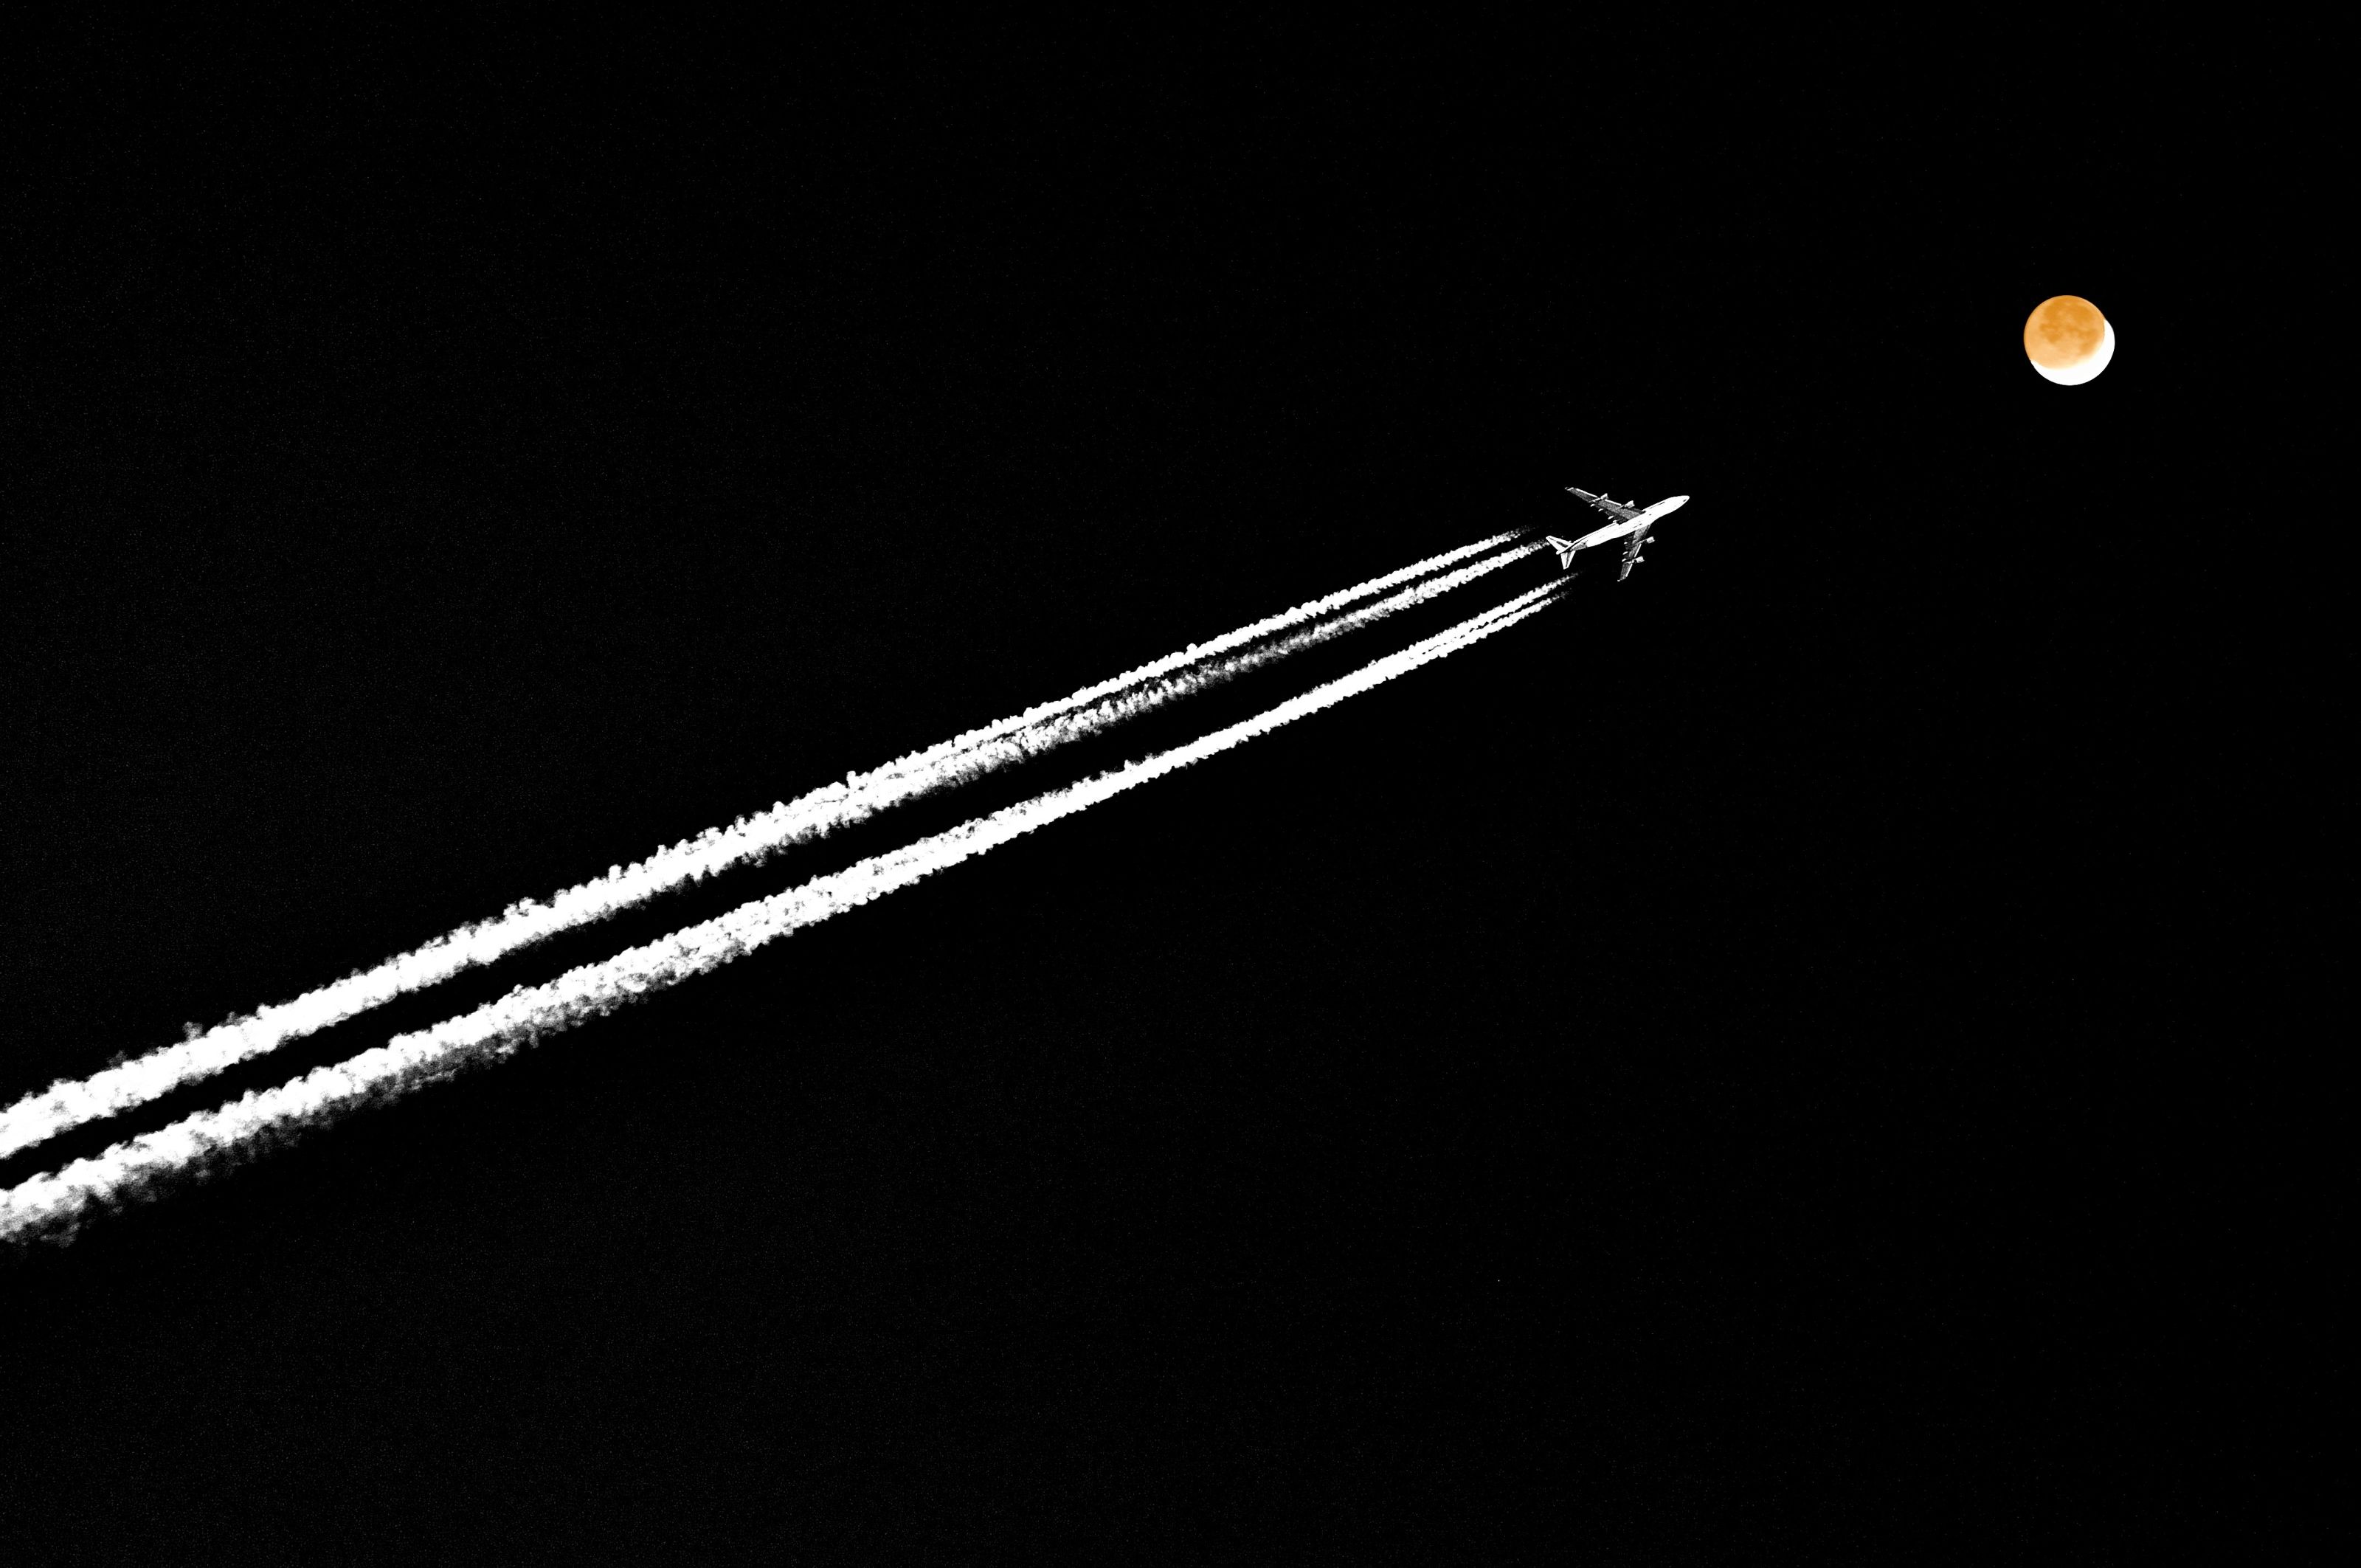 A quad-engine plane silhouetted by the moon.